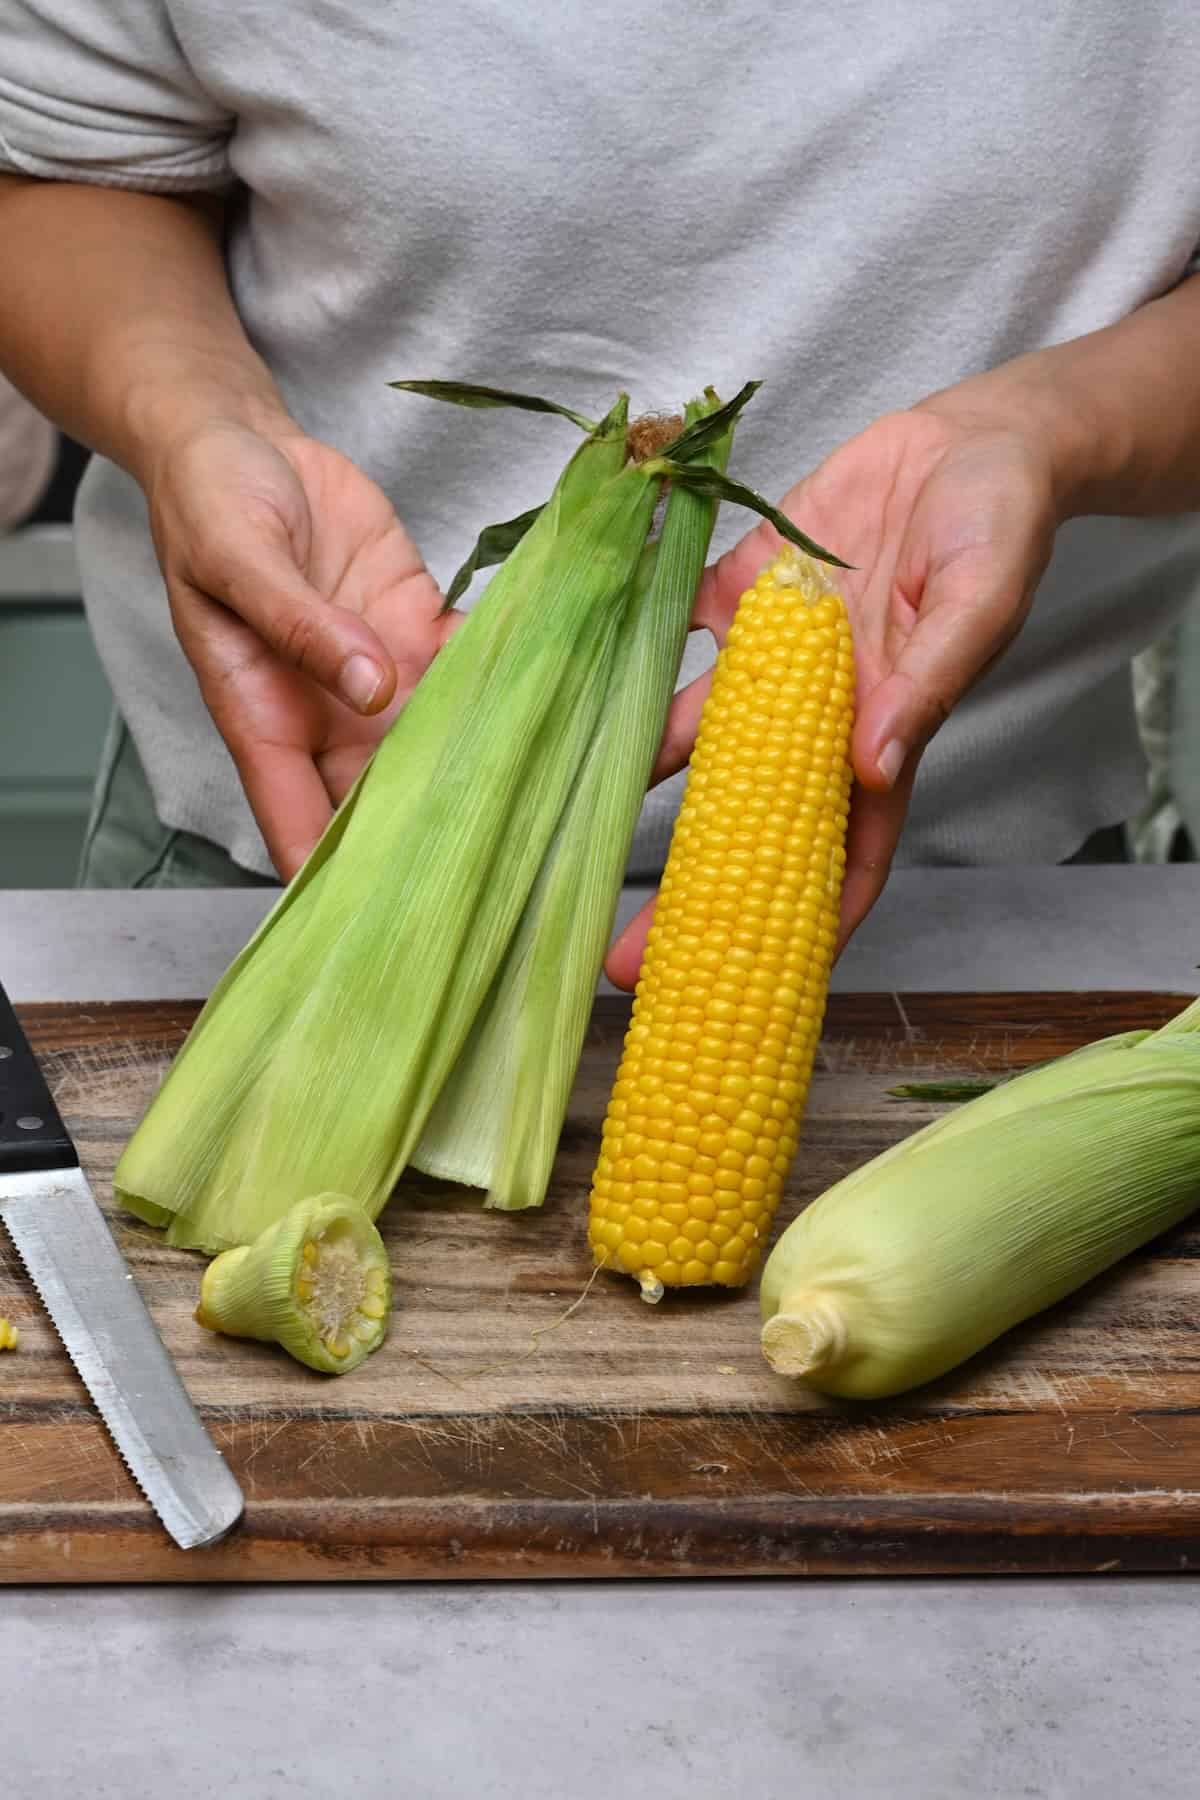 Microwaved corn on the cob with removed husk